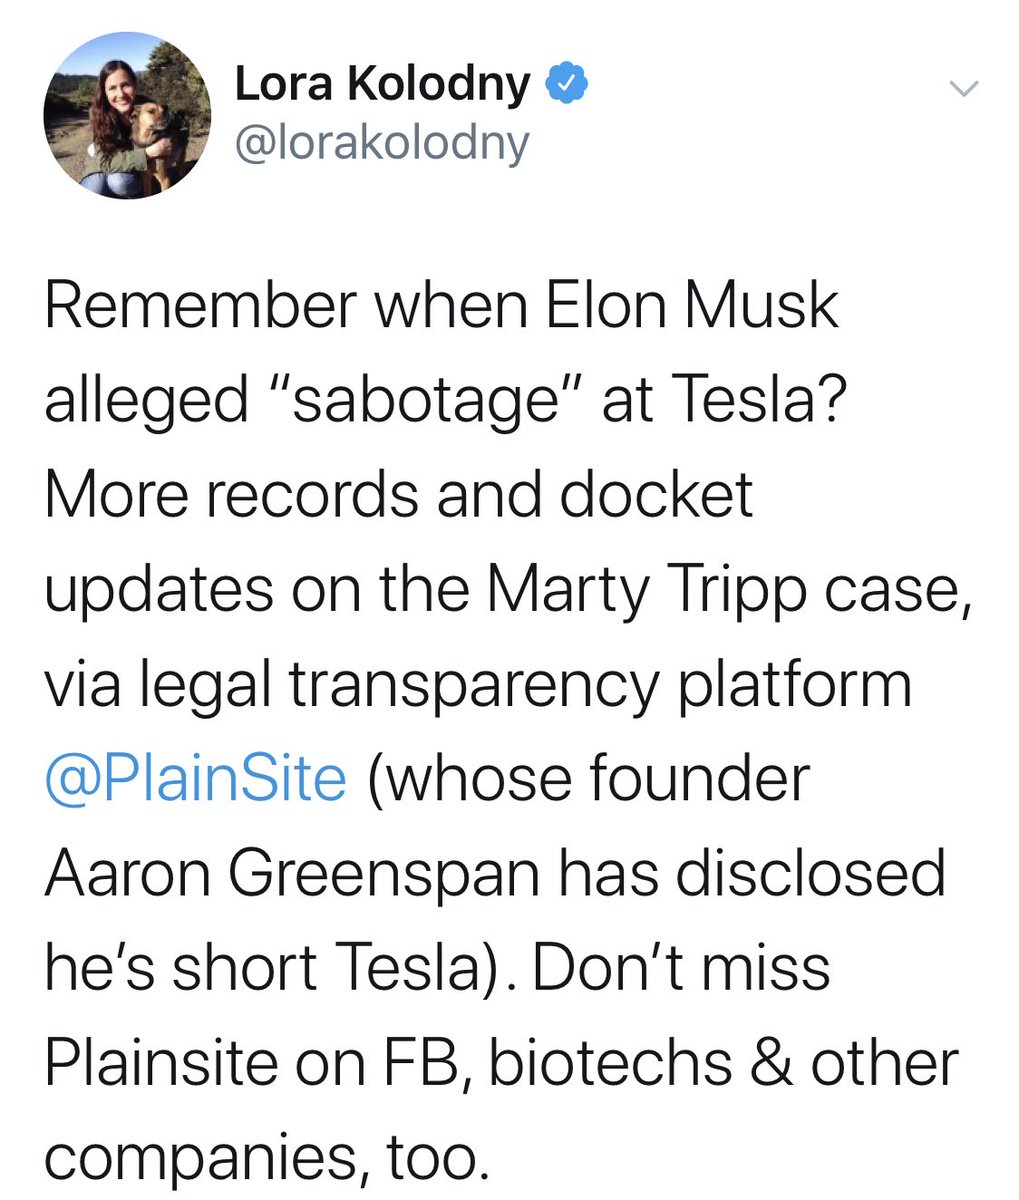 It’s amazing that Aaron can bully Tesla fans, share damaging things about the company with his own spin, all while shorting the stock. Then Aaron gets a commercial from the media. The media in turn, pays Aaron money for doing their job. Disgusting.  $TSLA  #Tesla  https://twitter.com/lorakolodny/status/1198684507282395137